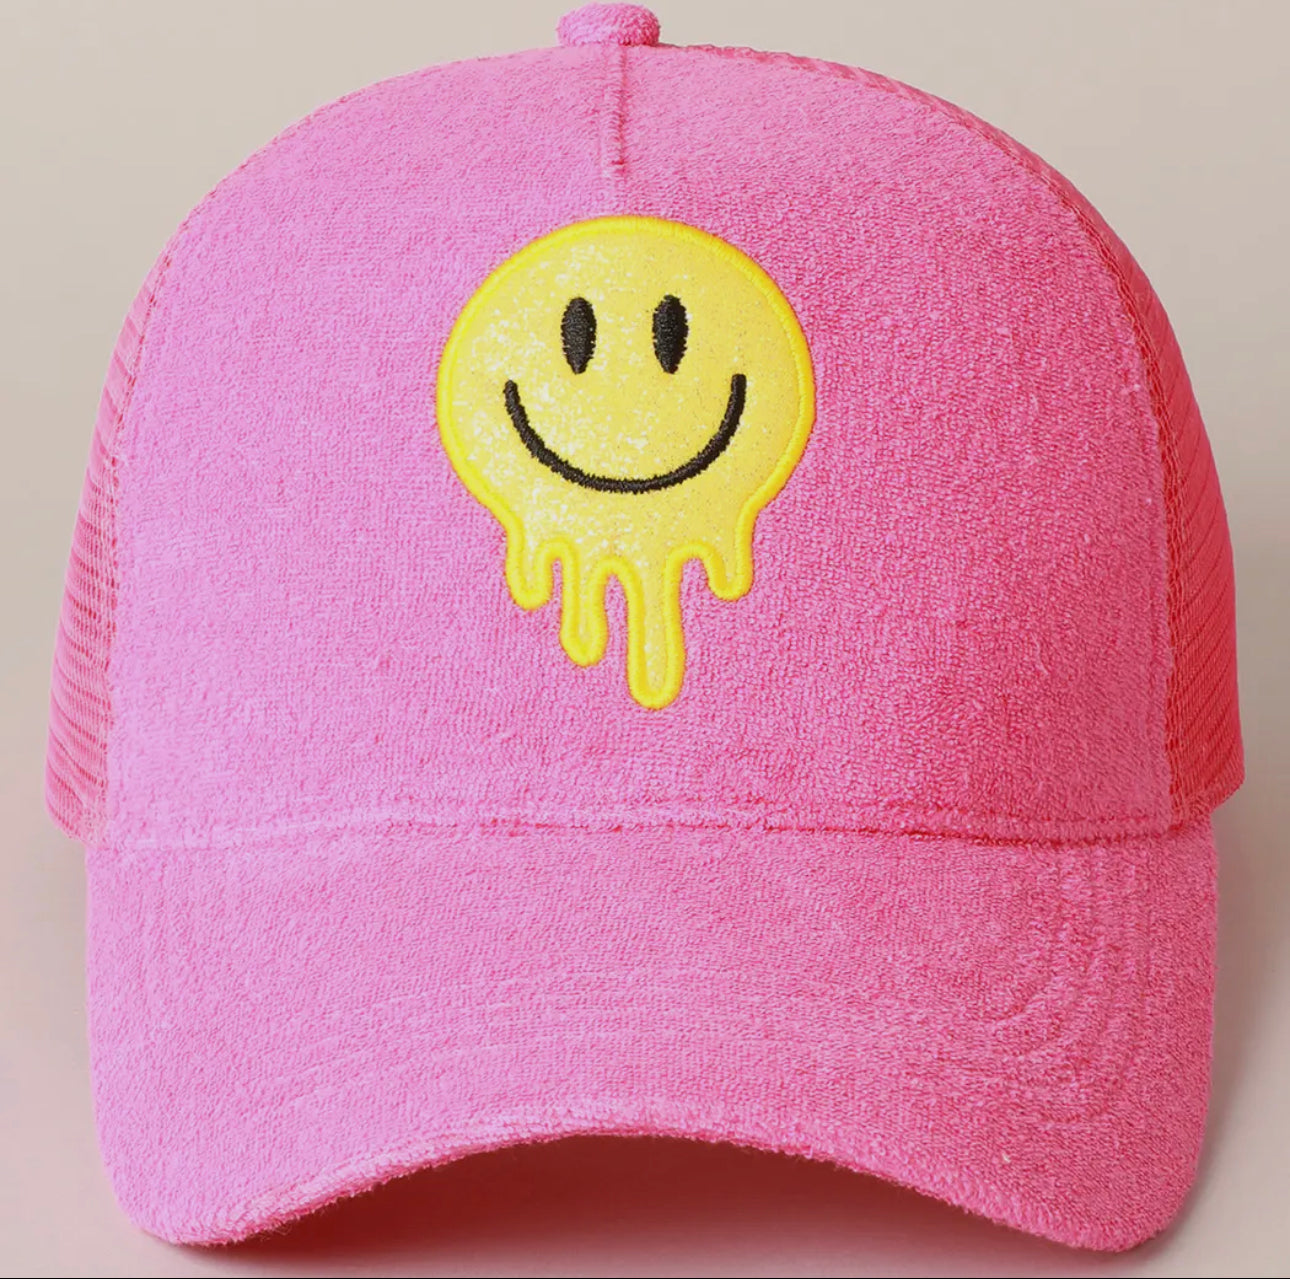 Terry Smiley Hat- Pink